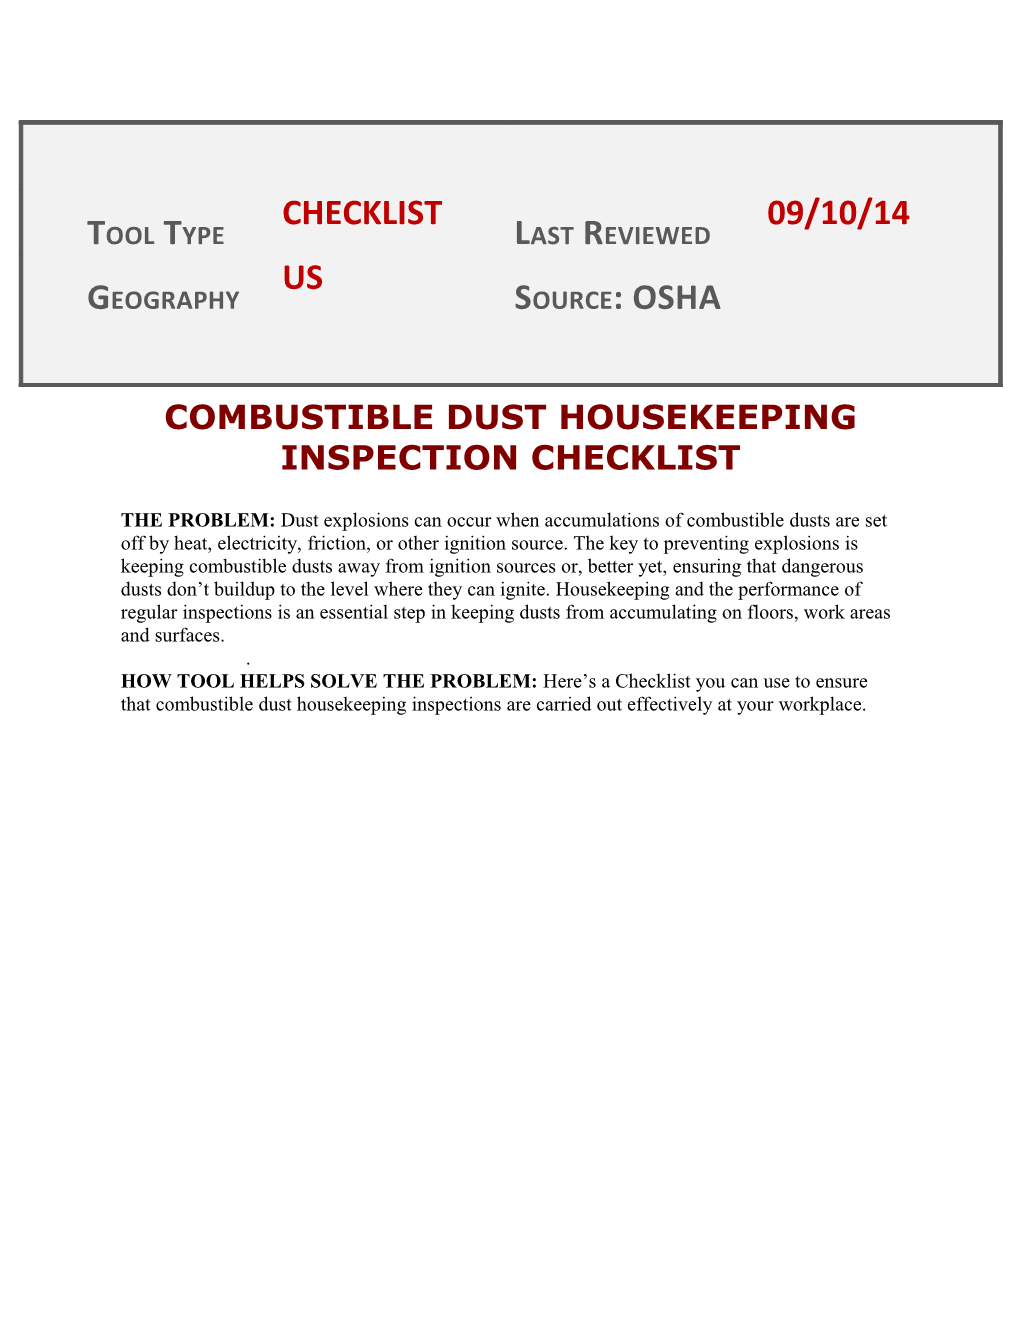 Combustible Dust Housekeeping Inspection Checklist